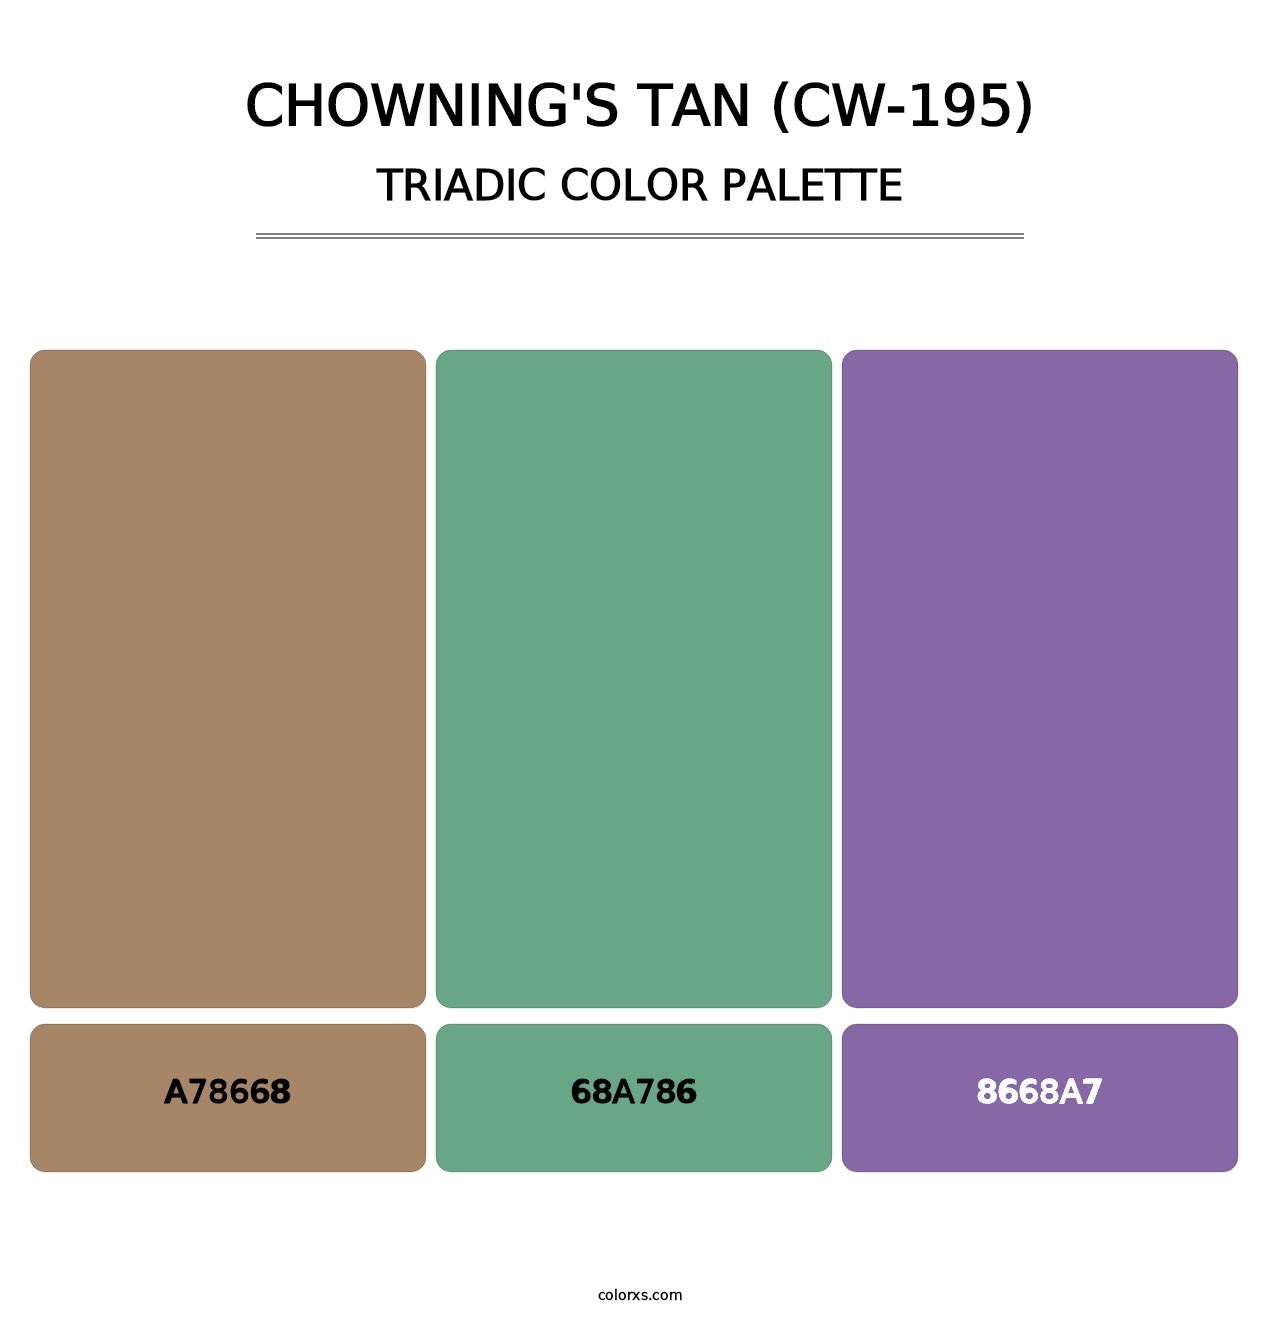 Chowning's Tan (CW-195) - Triadic Color Palette